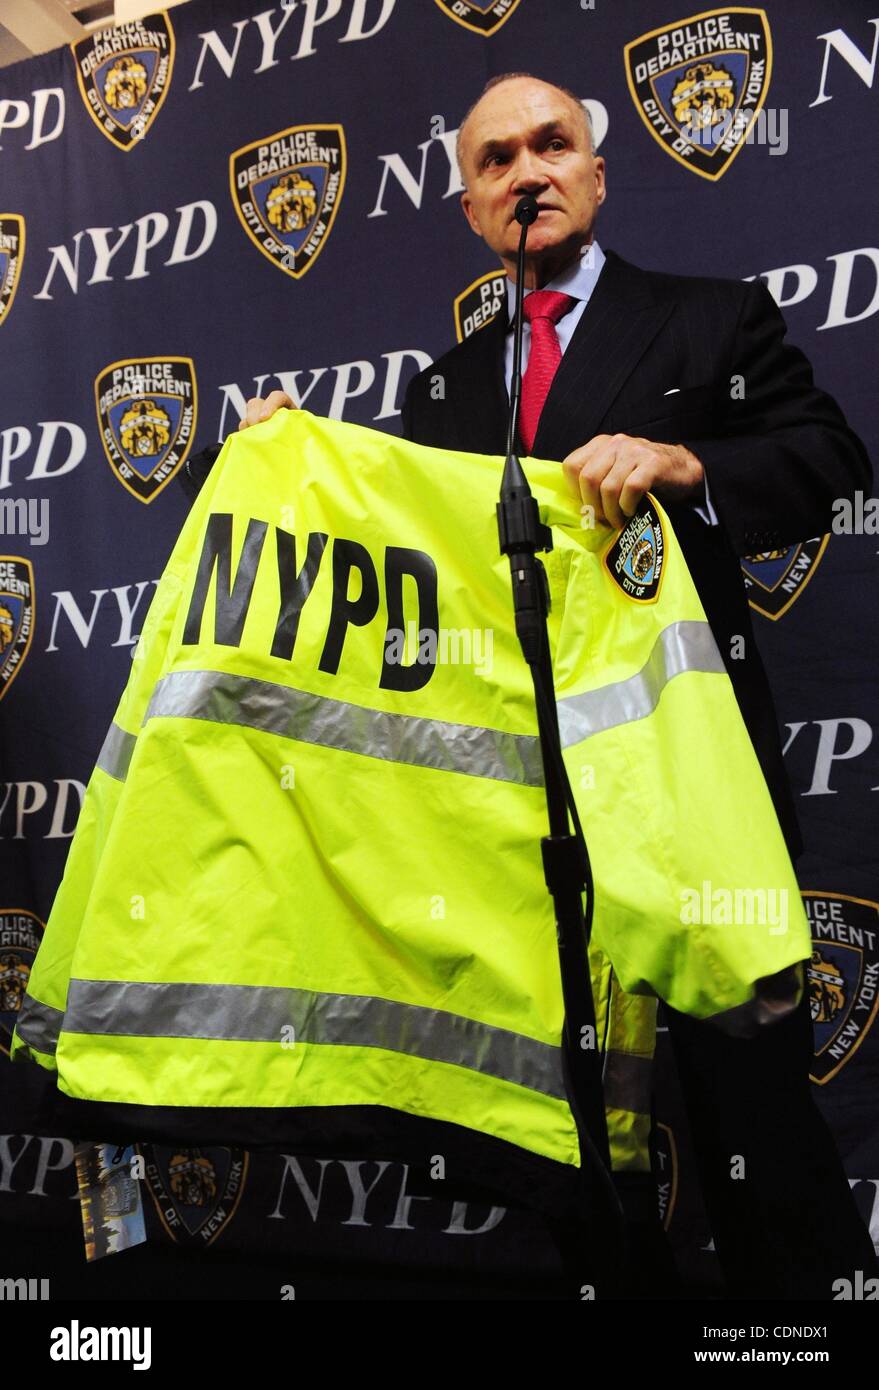 May 27, 2011 - Manhattan, New York, U.S. - Police Commissioner RAYMOND  KELLY shows off the new NYPD rain jacket. City of New York Police  Department Promotion Ceremony, One Police Plaza. (Credit